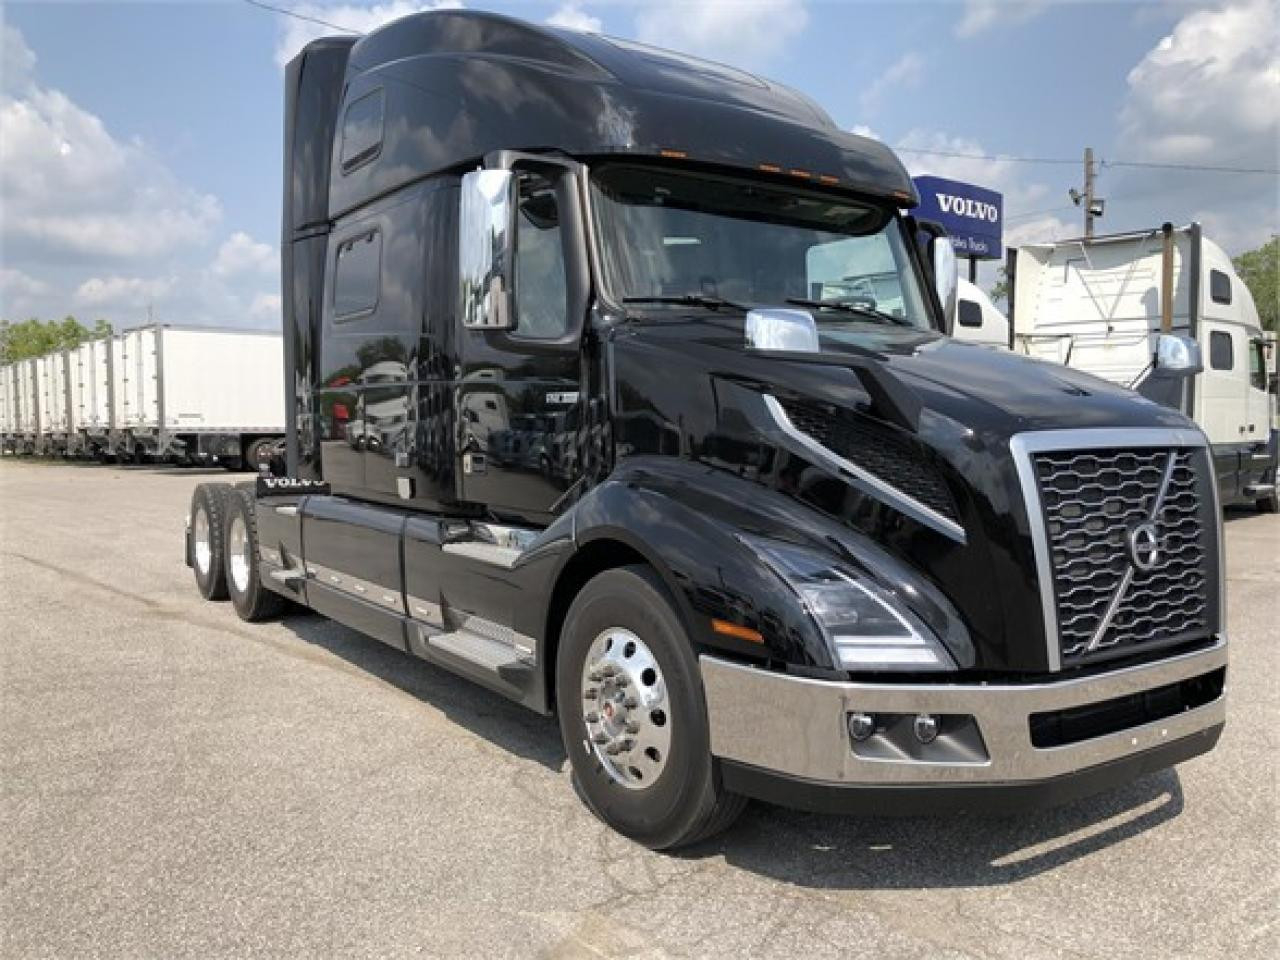 New 2021 Volvo Vnl64T860 For Sale In Defiance, Oh 43512-2021 W 9 Form For Ohio